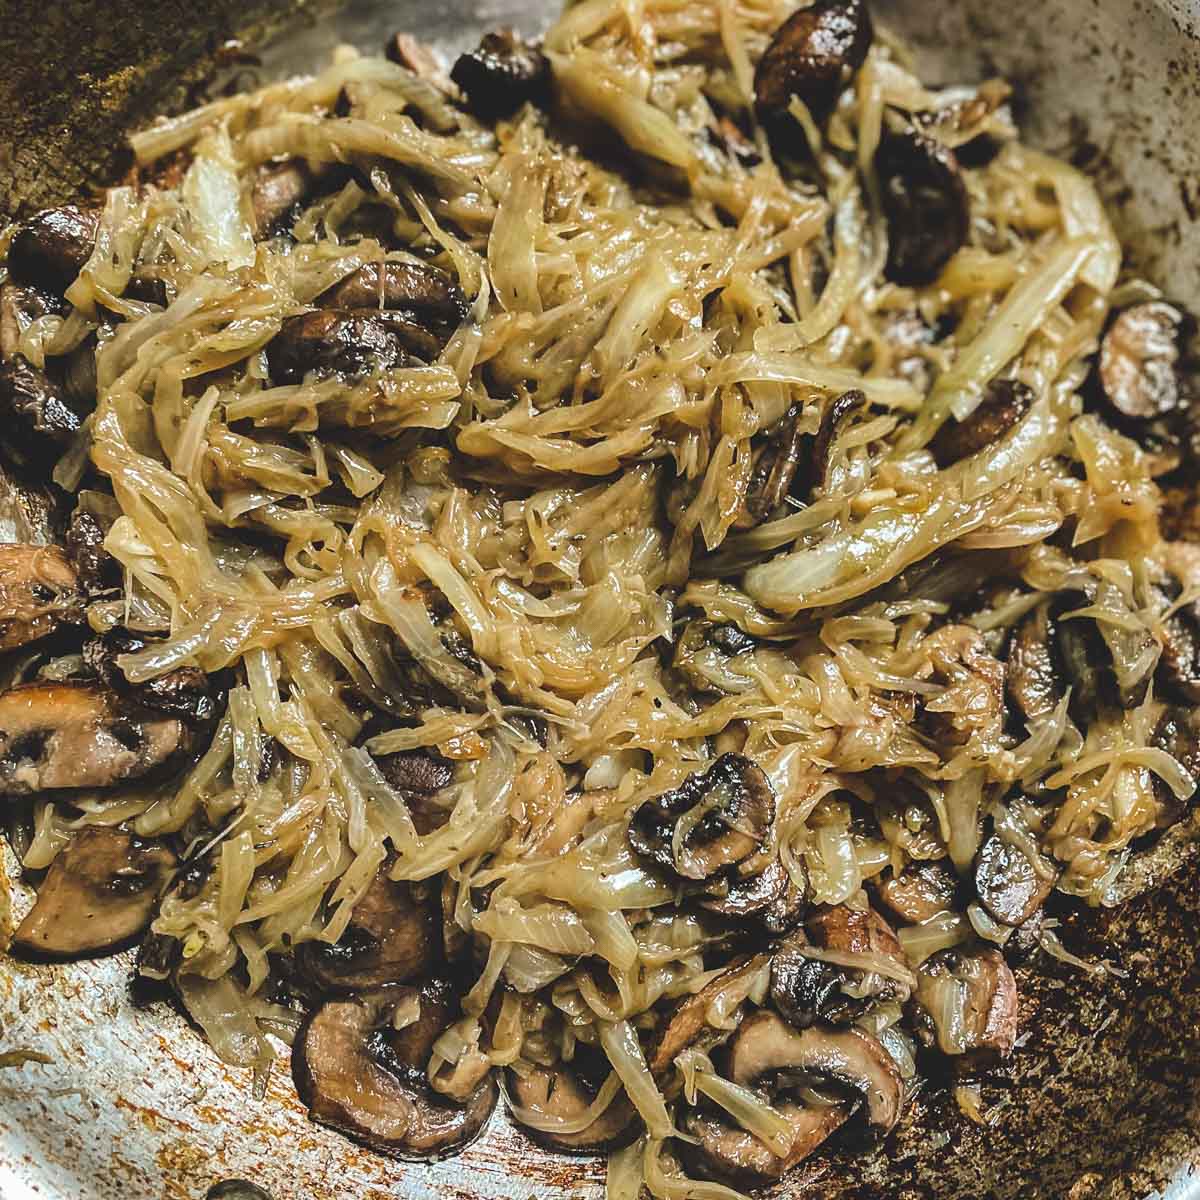 The finished caramelized onions and mushrooms are now deeply browned and softened.